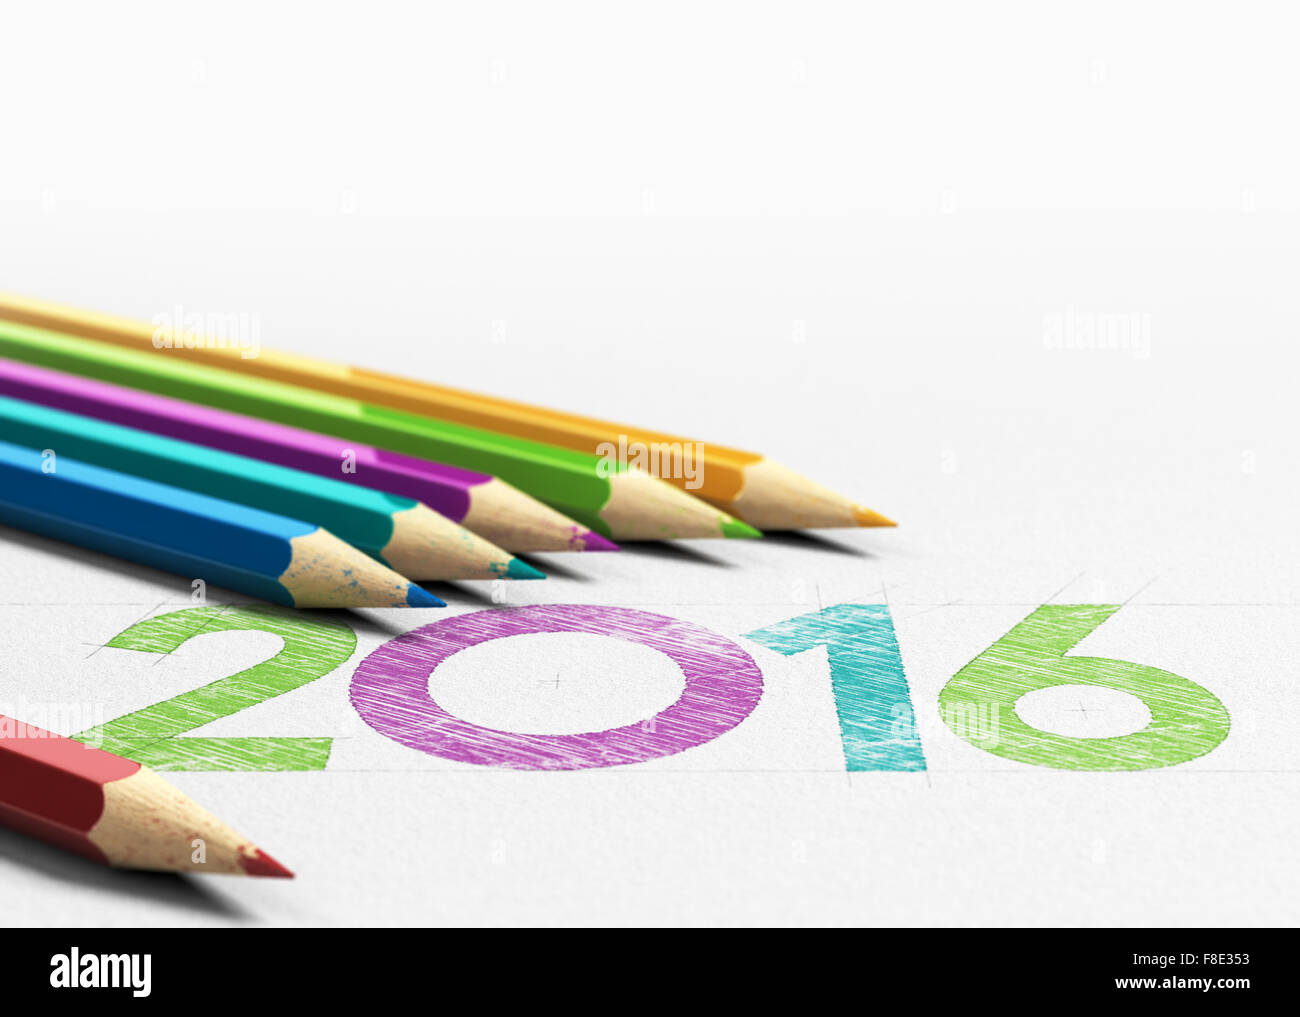 New year 2016 handwritten on a paper texture with six wooden pencils sourounding it. Concept image for greeting card design back Stock Photo